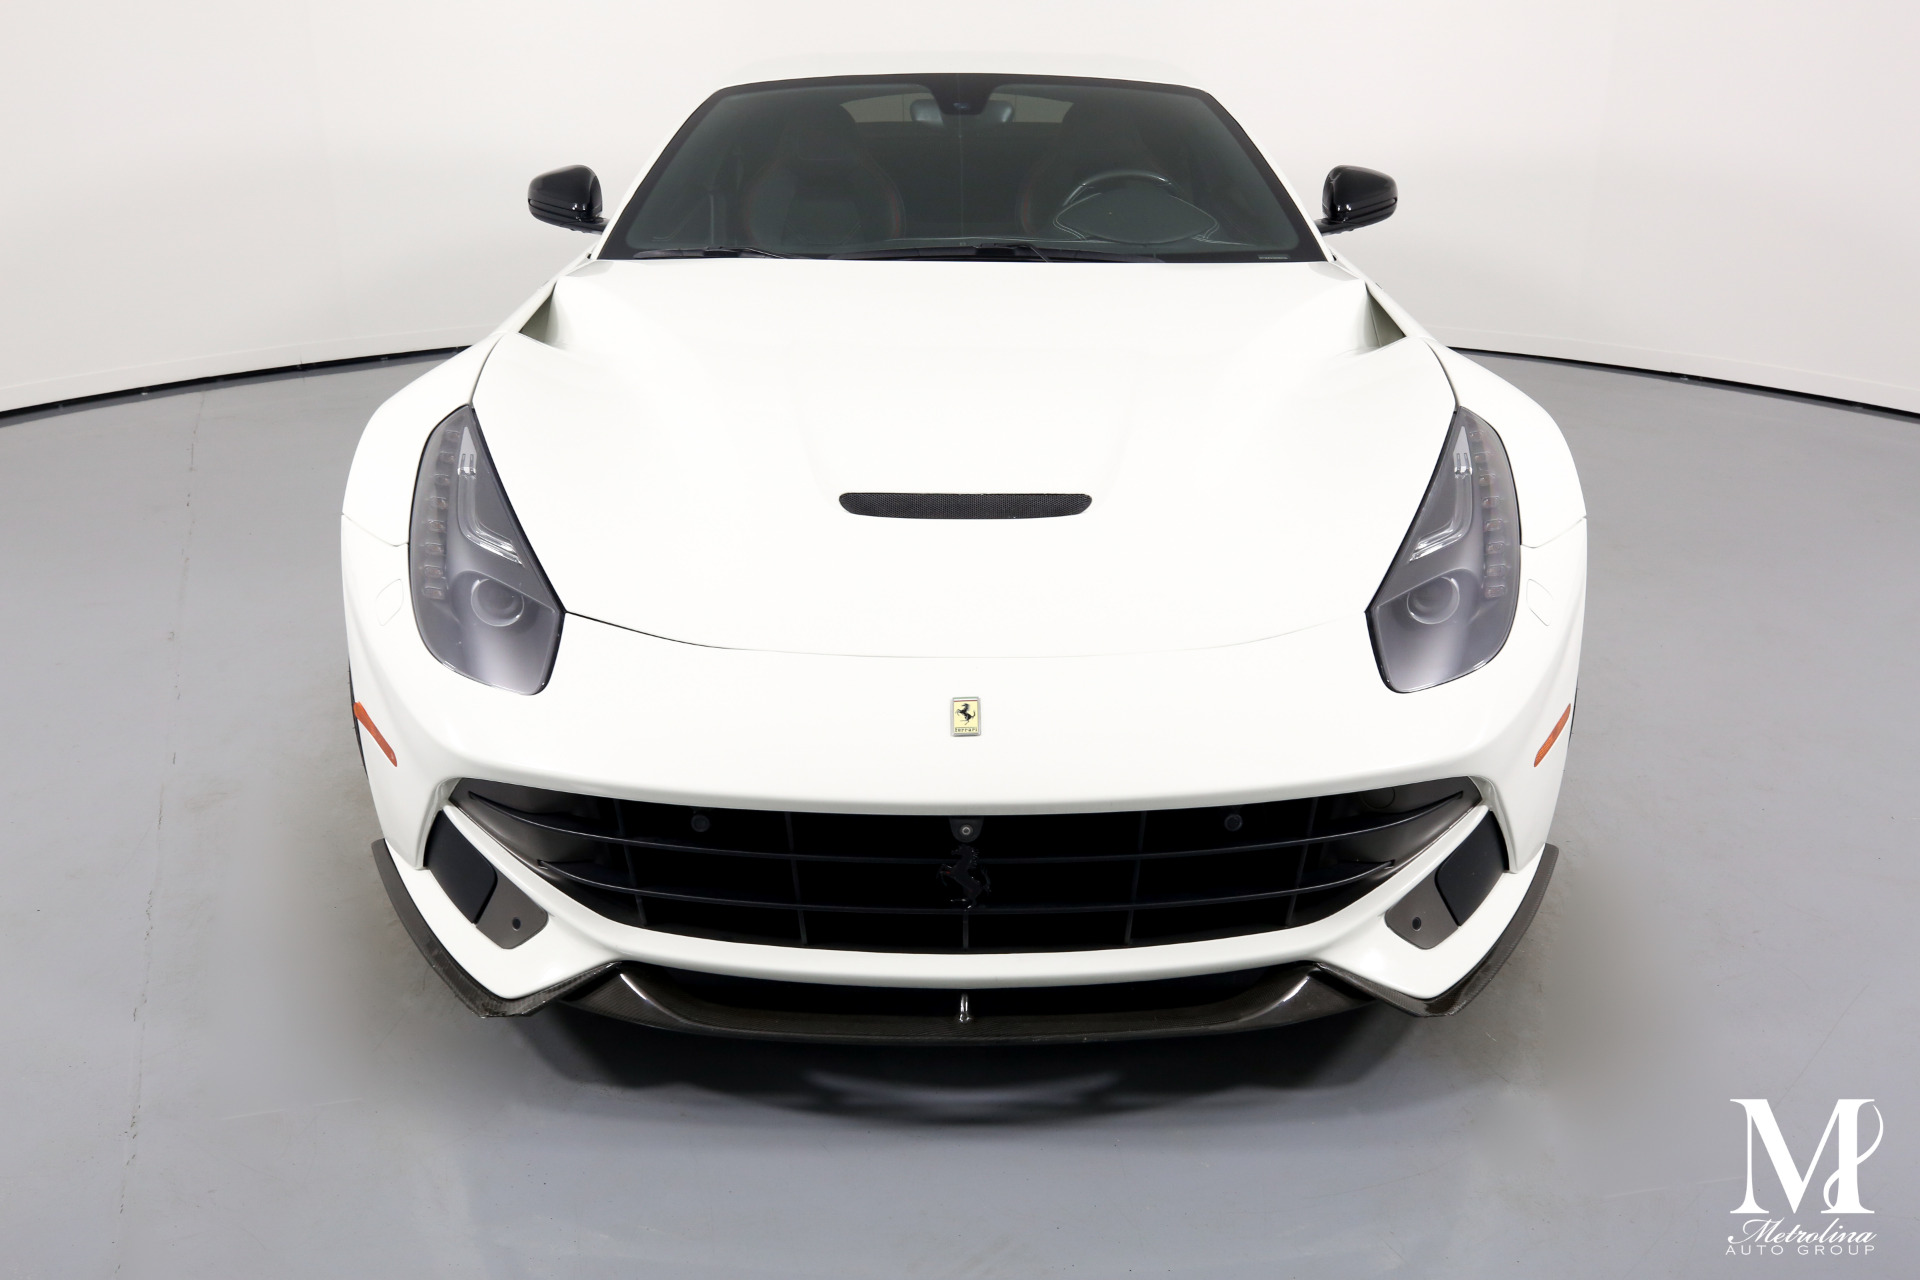 Used 2013 Ferrari F12berlinetta for sale Sold at Metrolina Auto Group in Charlotte NC 28217 - 3